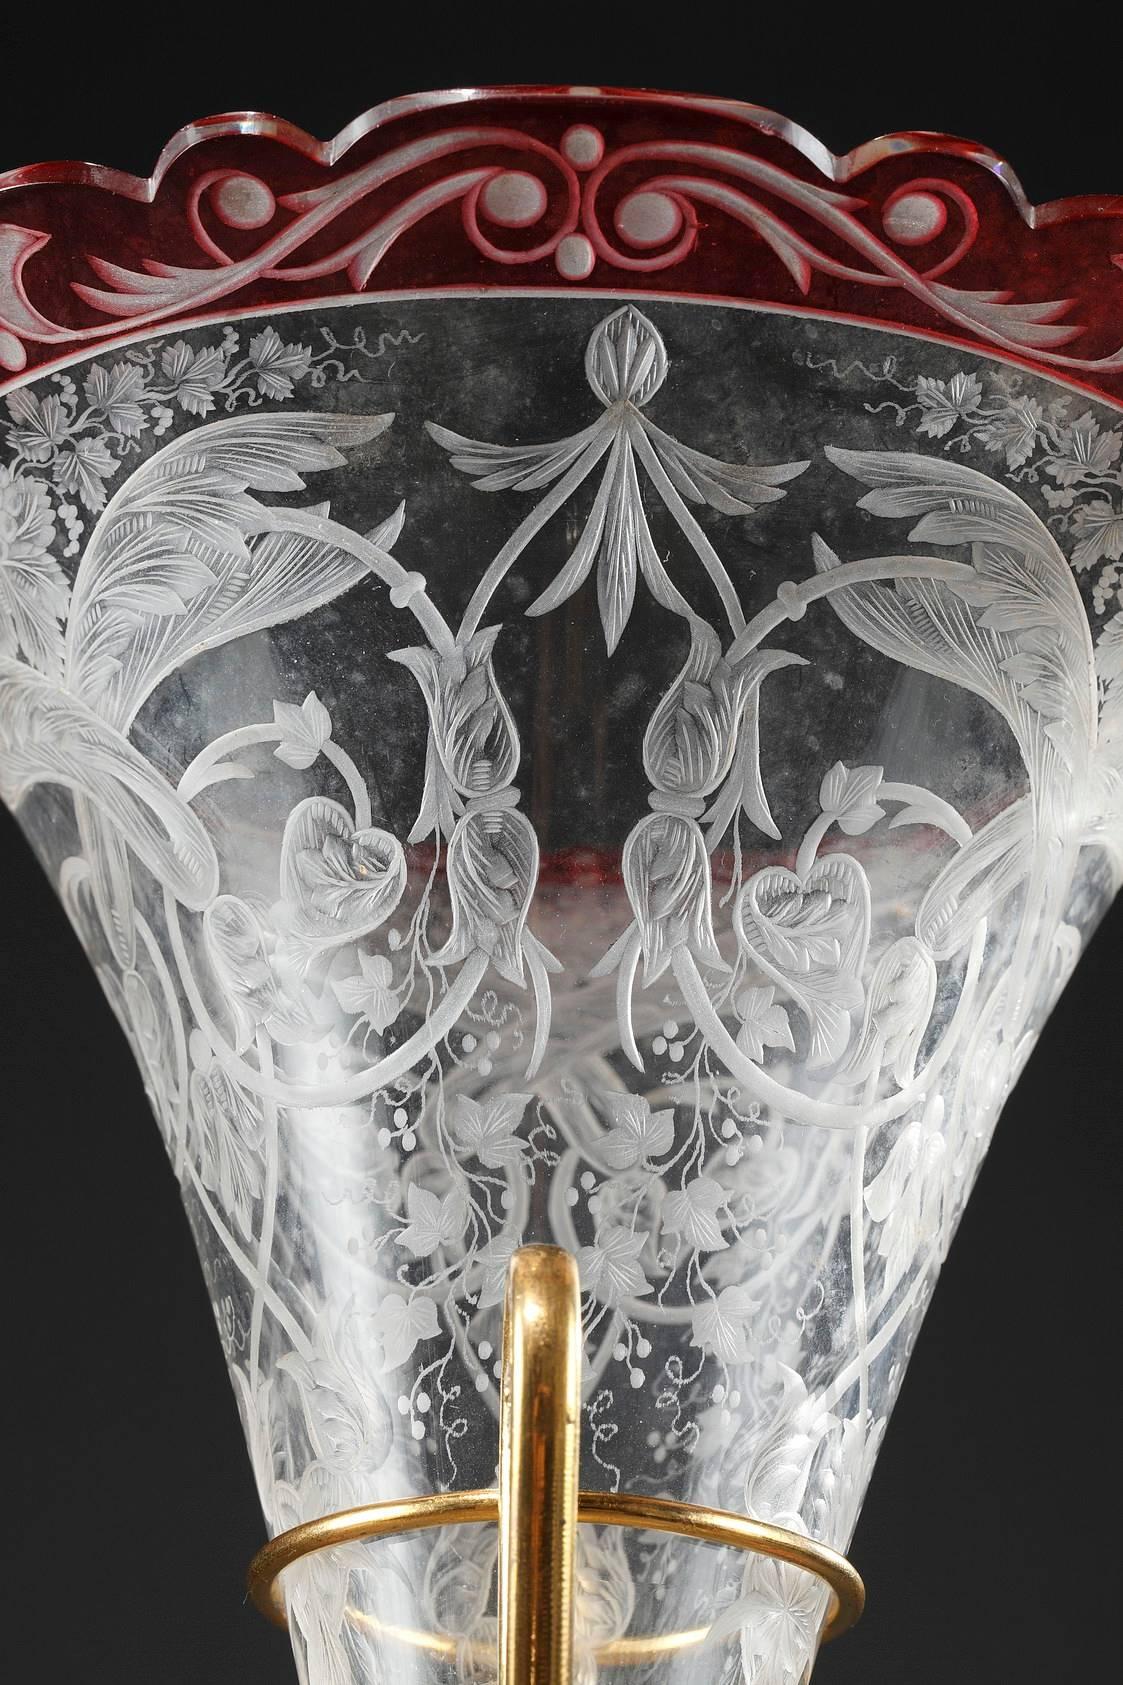 Red and transparent crystal centerpiece composed of a flared vase and cup. They are engraved with leafy rinceau, grape vines, and scrolling foliage. Gilt bronze mounts are decorated with antique cameos.